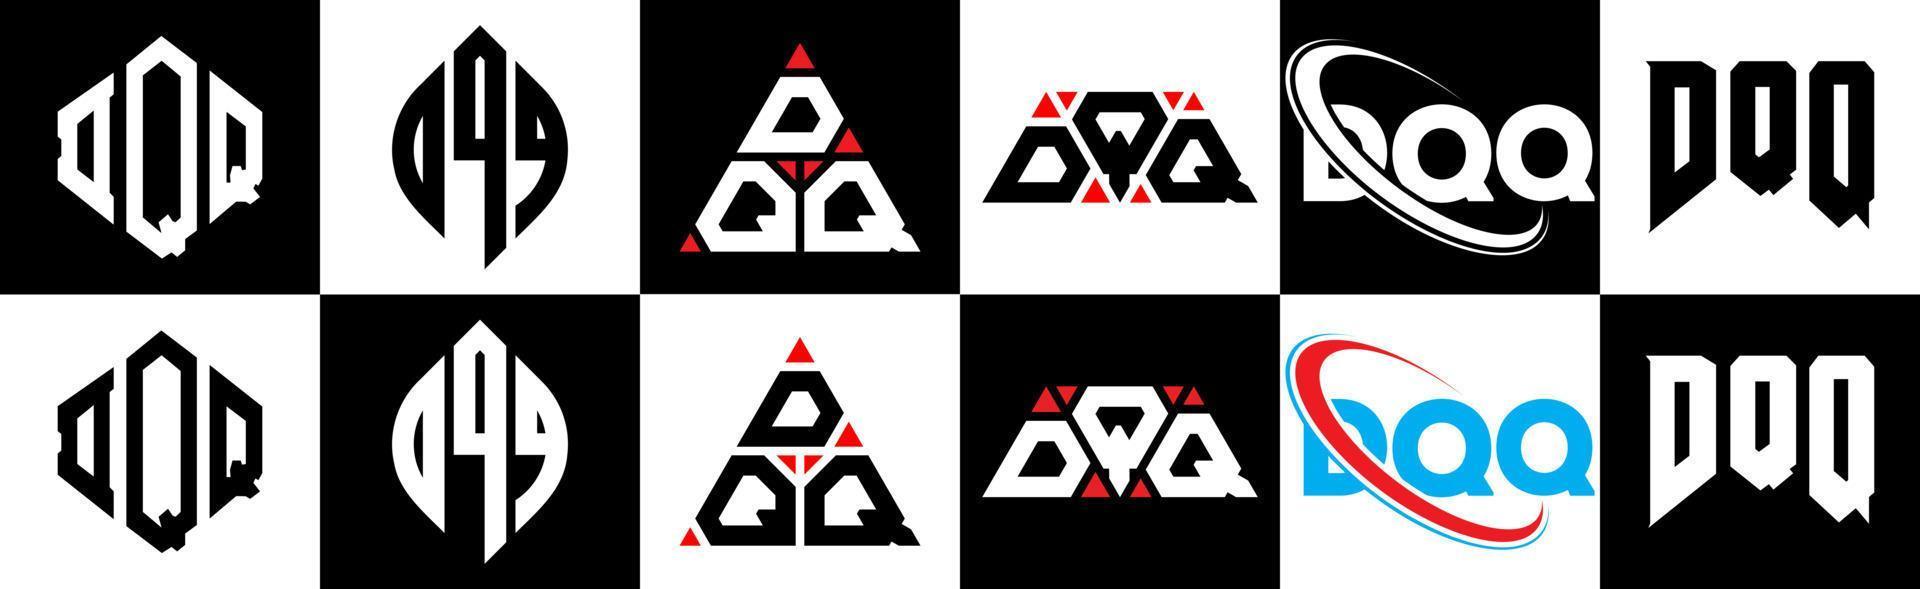 DQQ letter logo design in six style. DQQ polygon, circle, triangle, hexagon, flat and simple style with black and white color variation letter logo set in one artboard. DQQ minimalist and classic logo vector